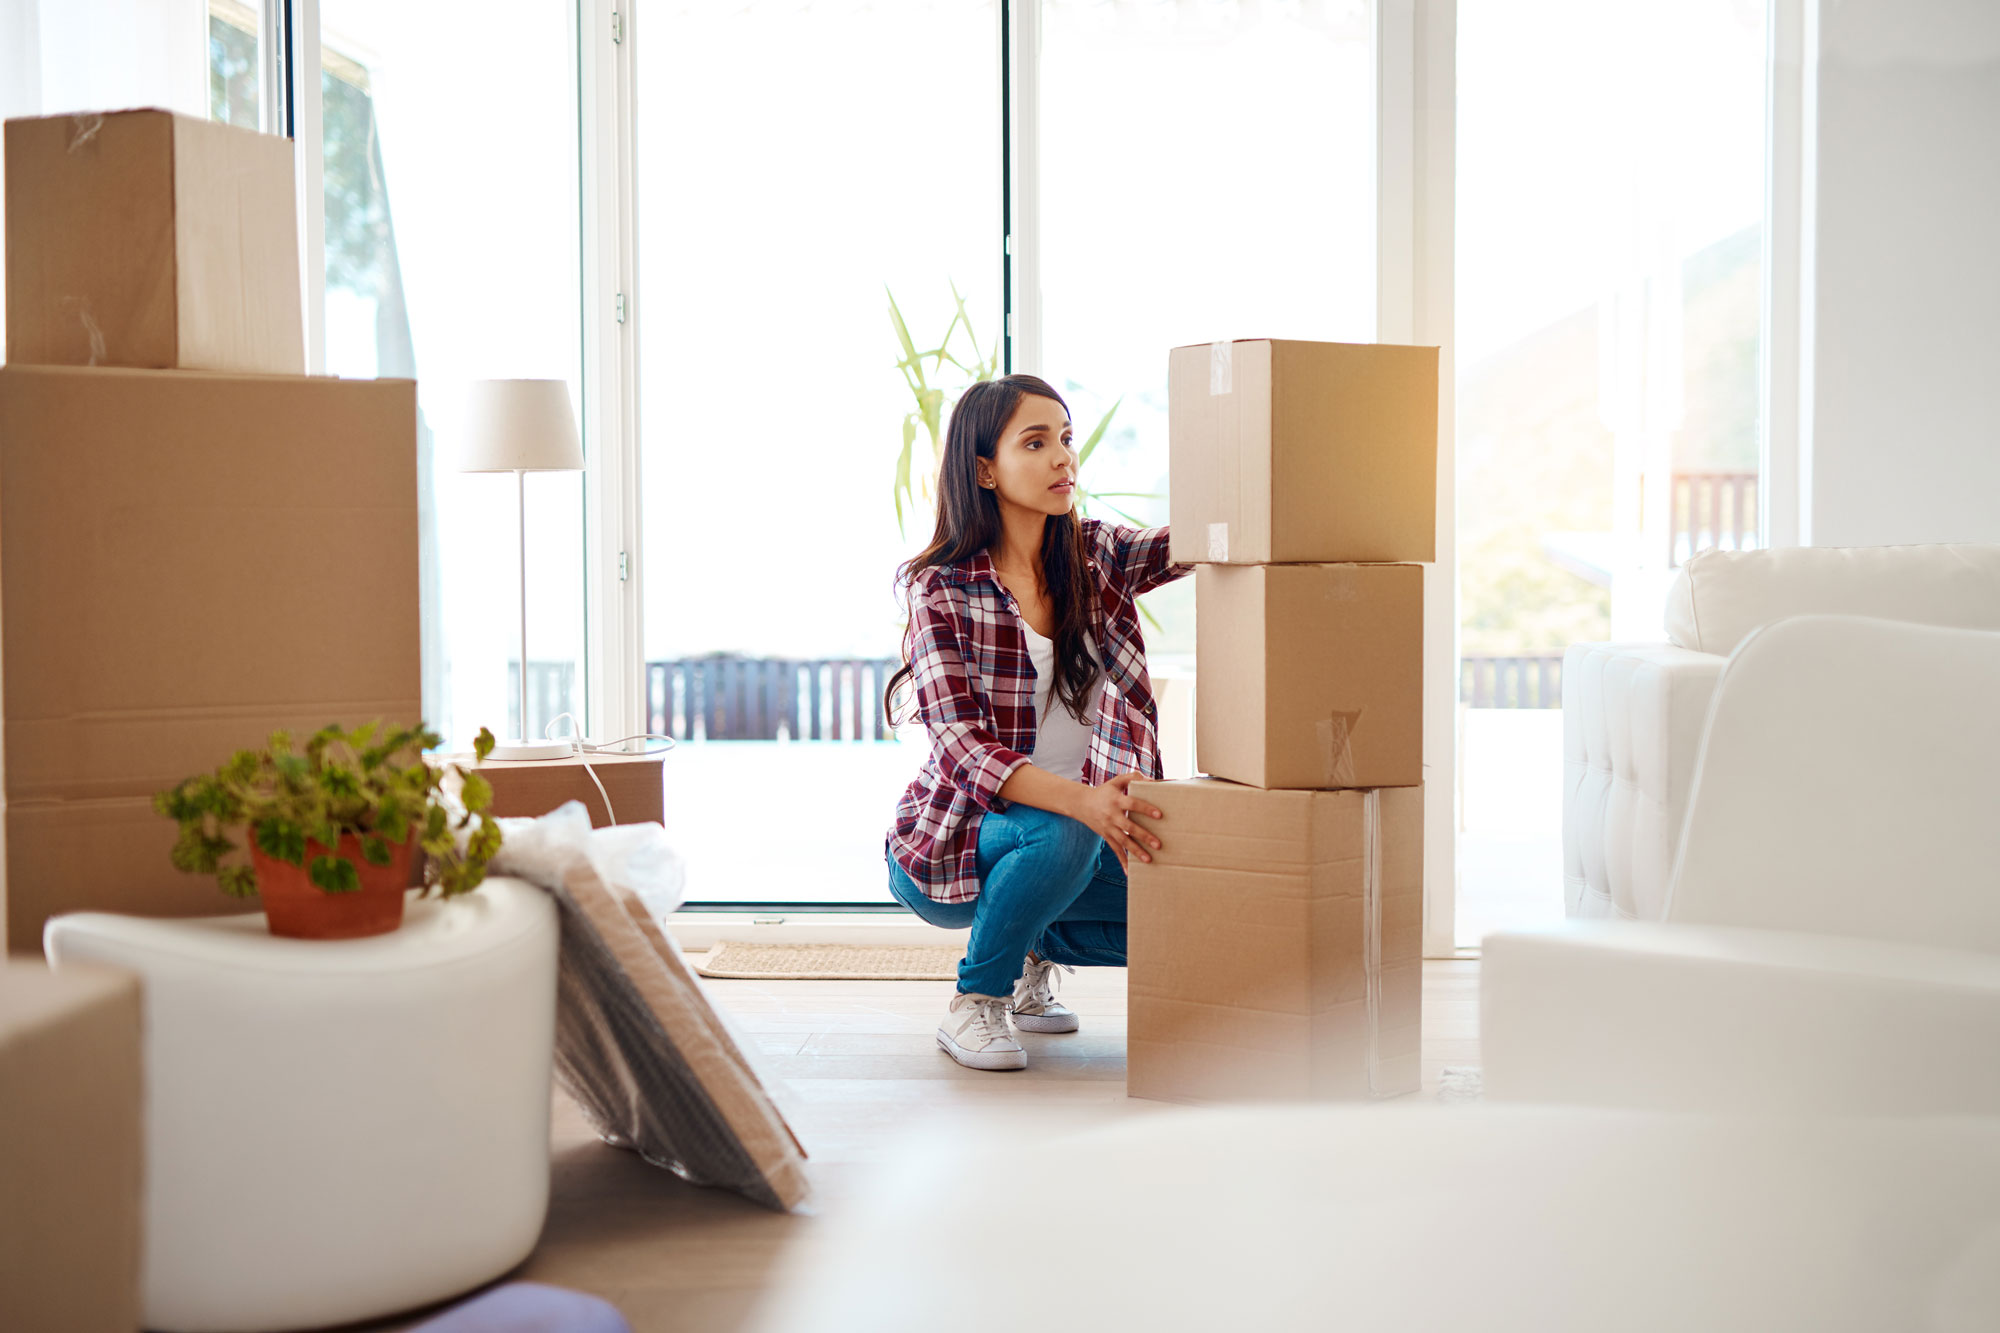 photo - Woman Packing and Stacking Moving Boxes